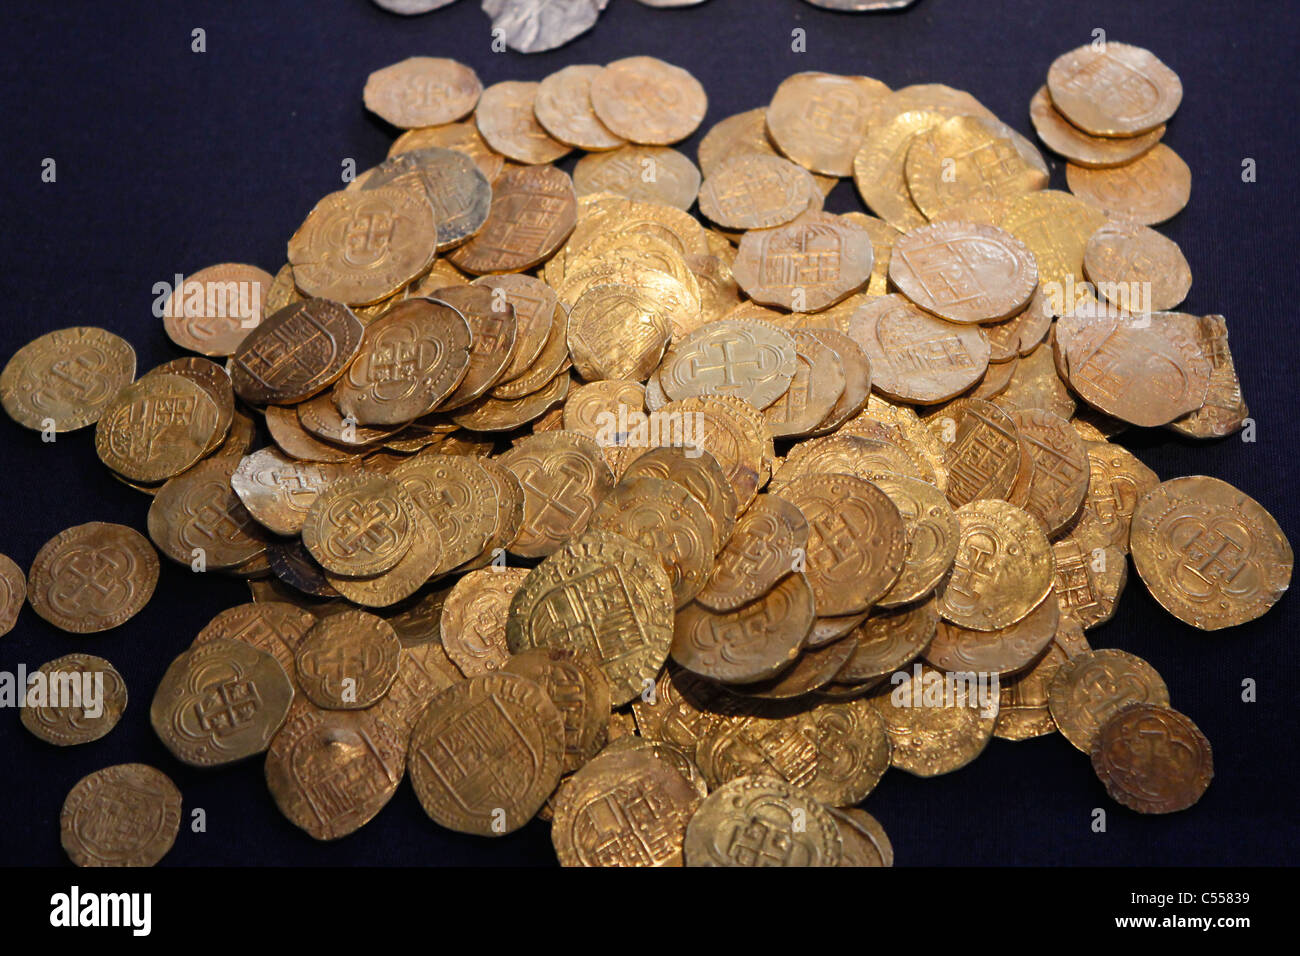 gold coins from the wreck of the Spanish Armada galleon La Girona, now in the Ulster Museum, Belfast, UK Stock Photo